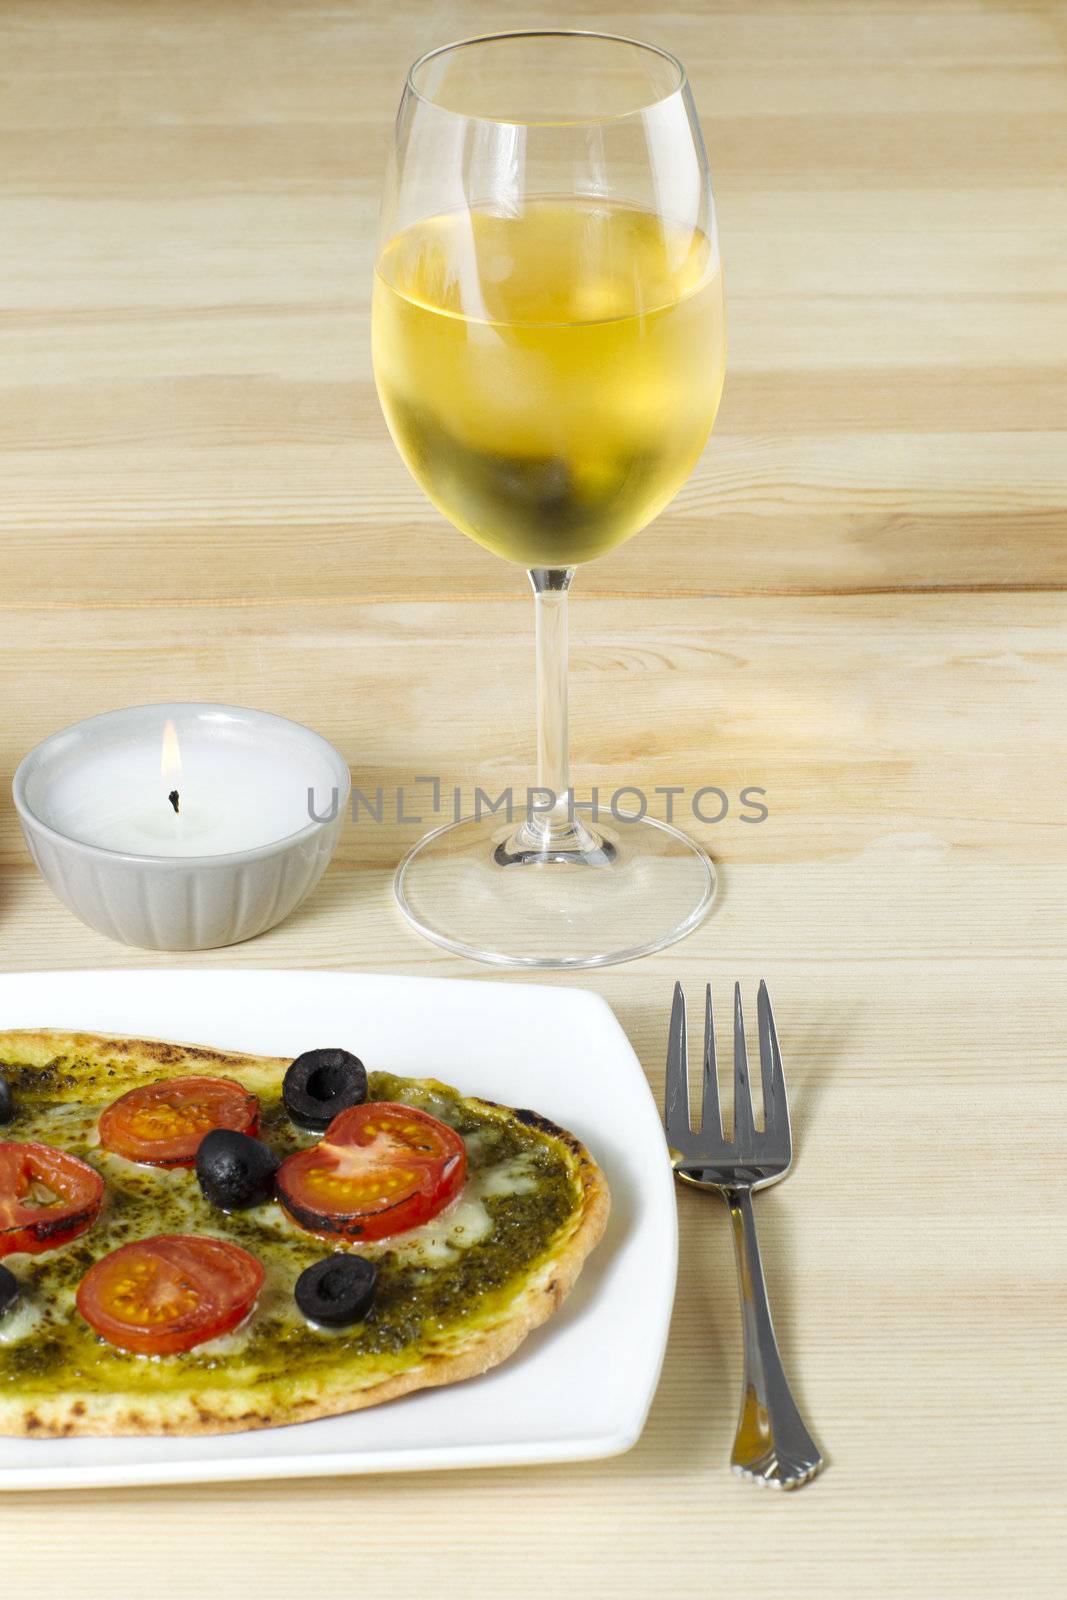 Baked pizza with wineglass and candle on table